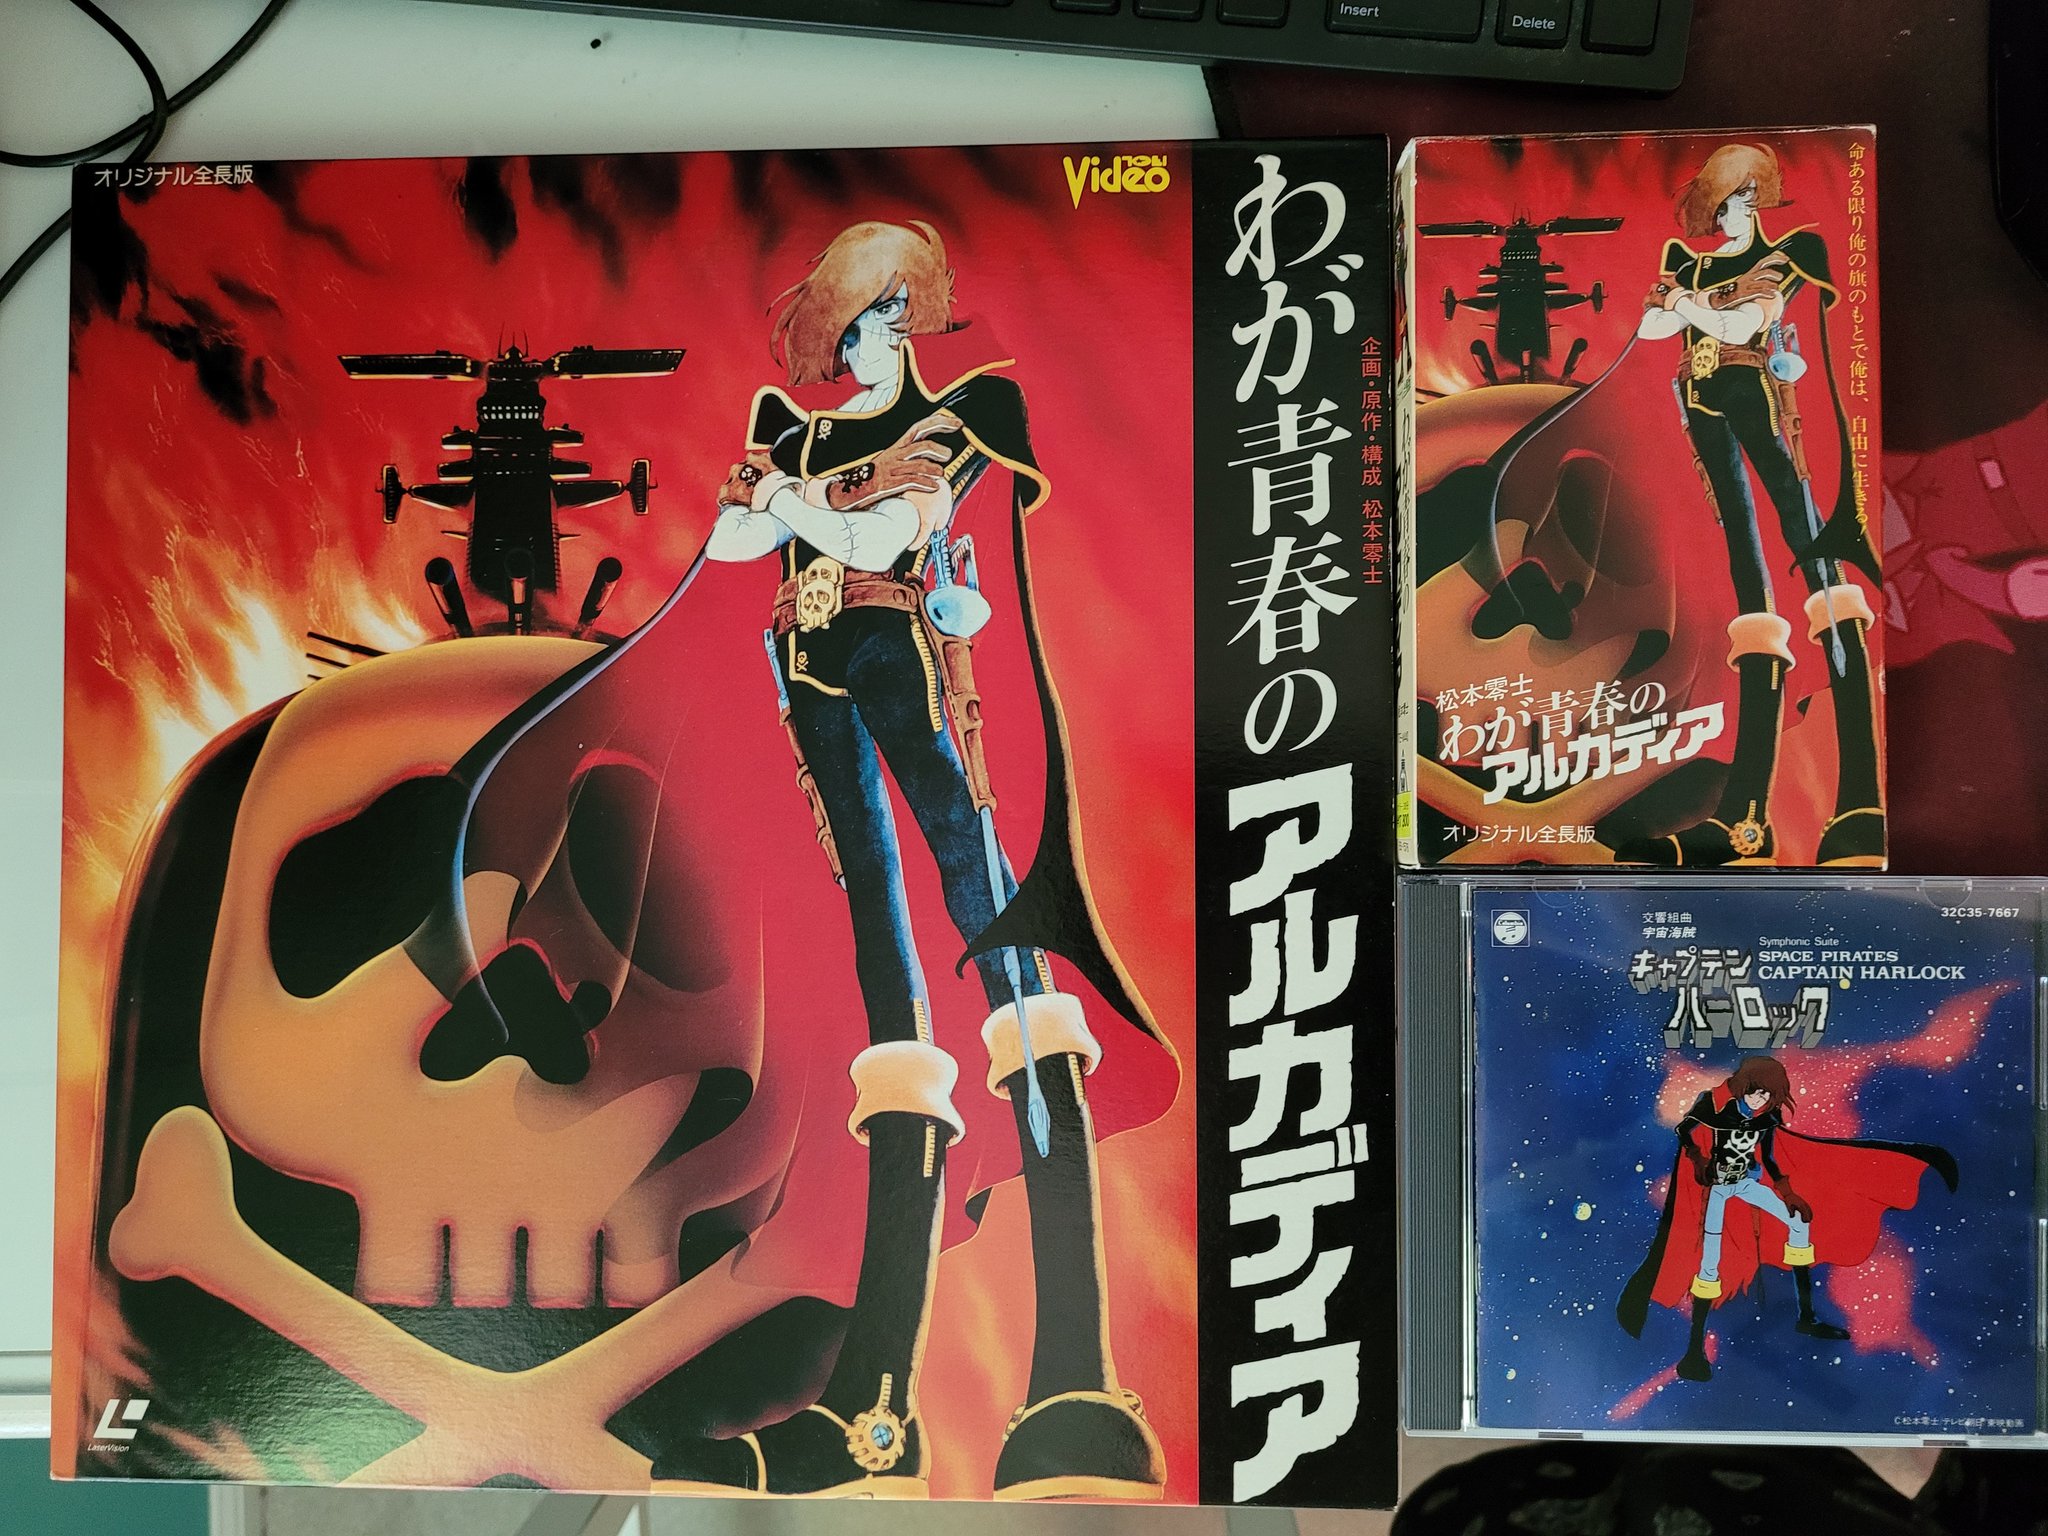 Gifts from a friend! Arcadia of my Youth Laserdisc, Betamax, and A Harlock CD.